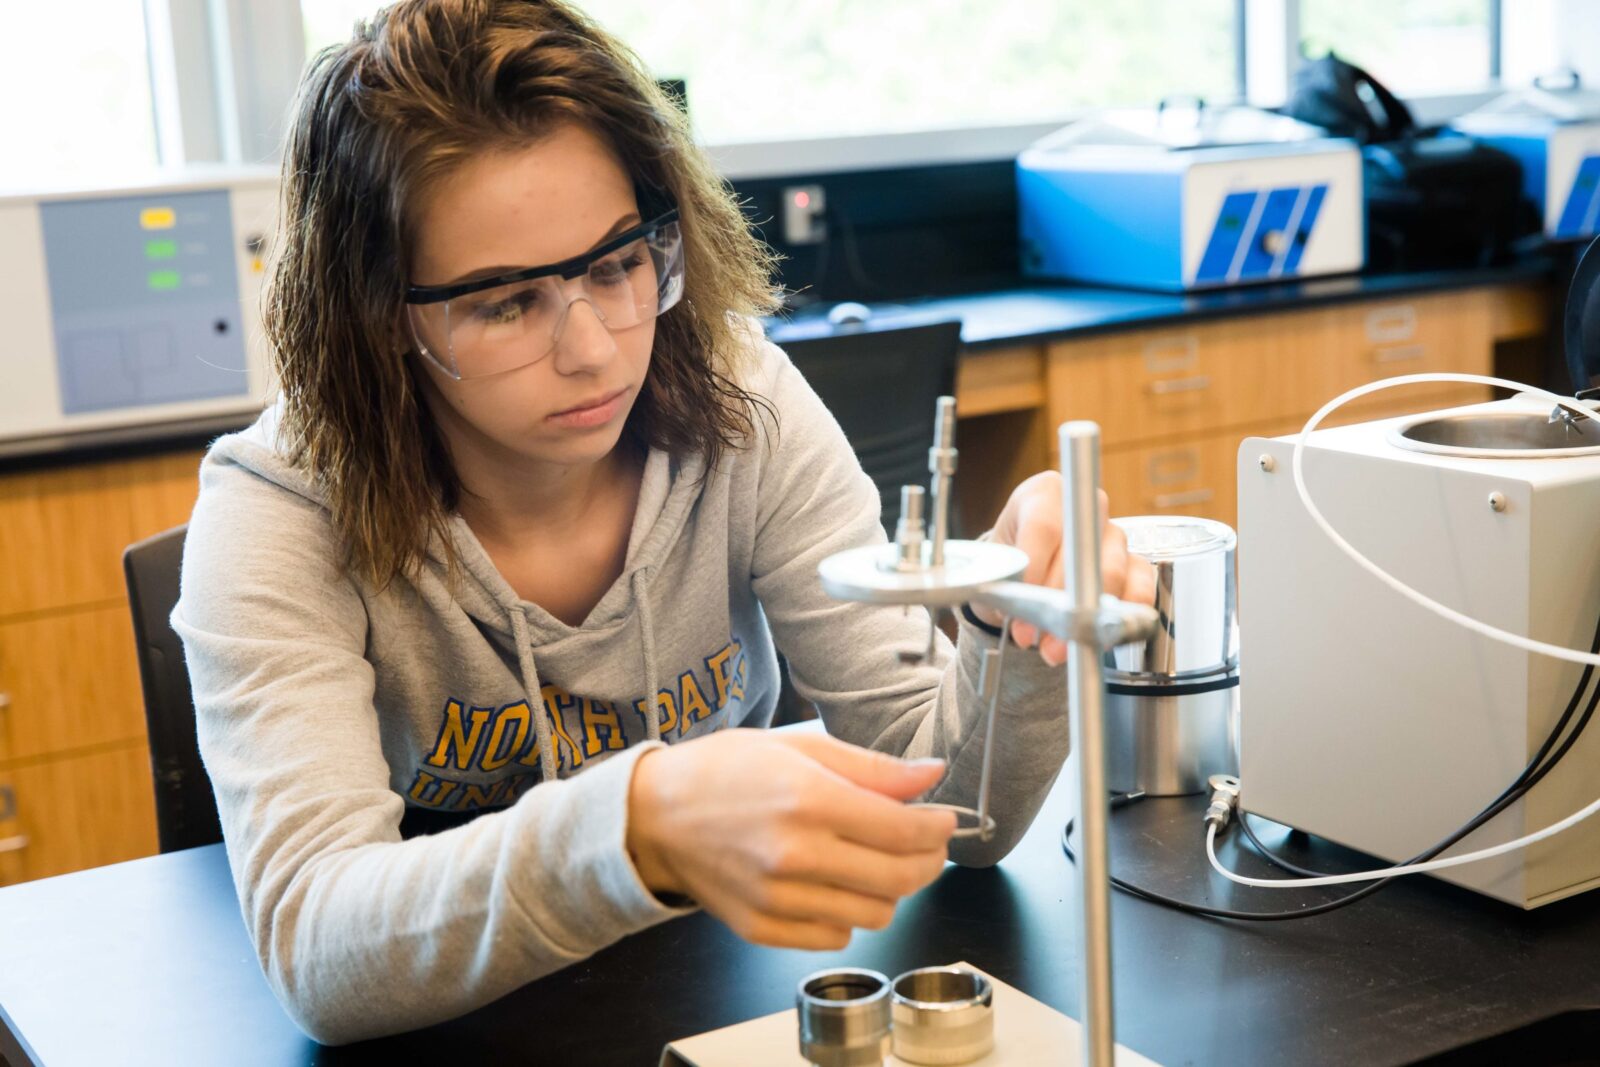 Summer Science Academy Returns to Provide High School Students Access to Engaging College-Level Science Courses